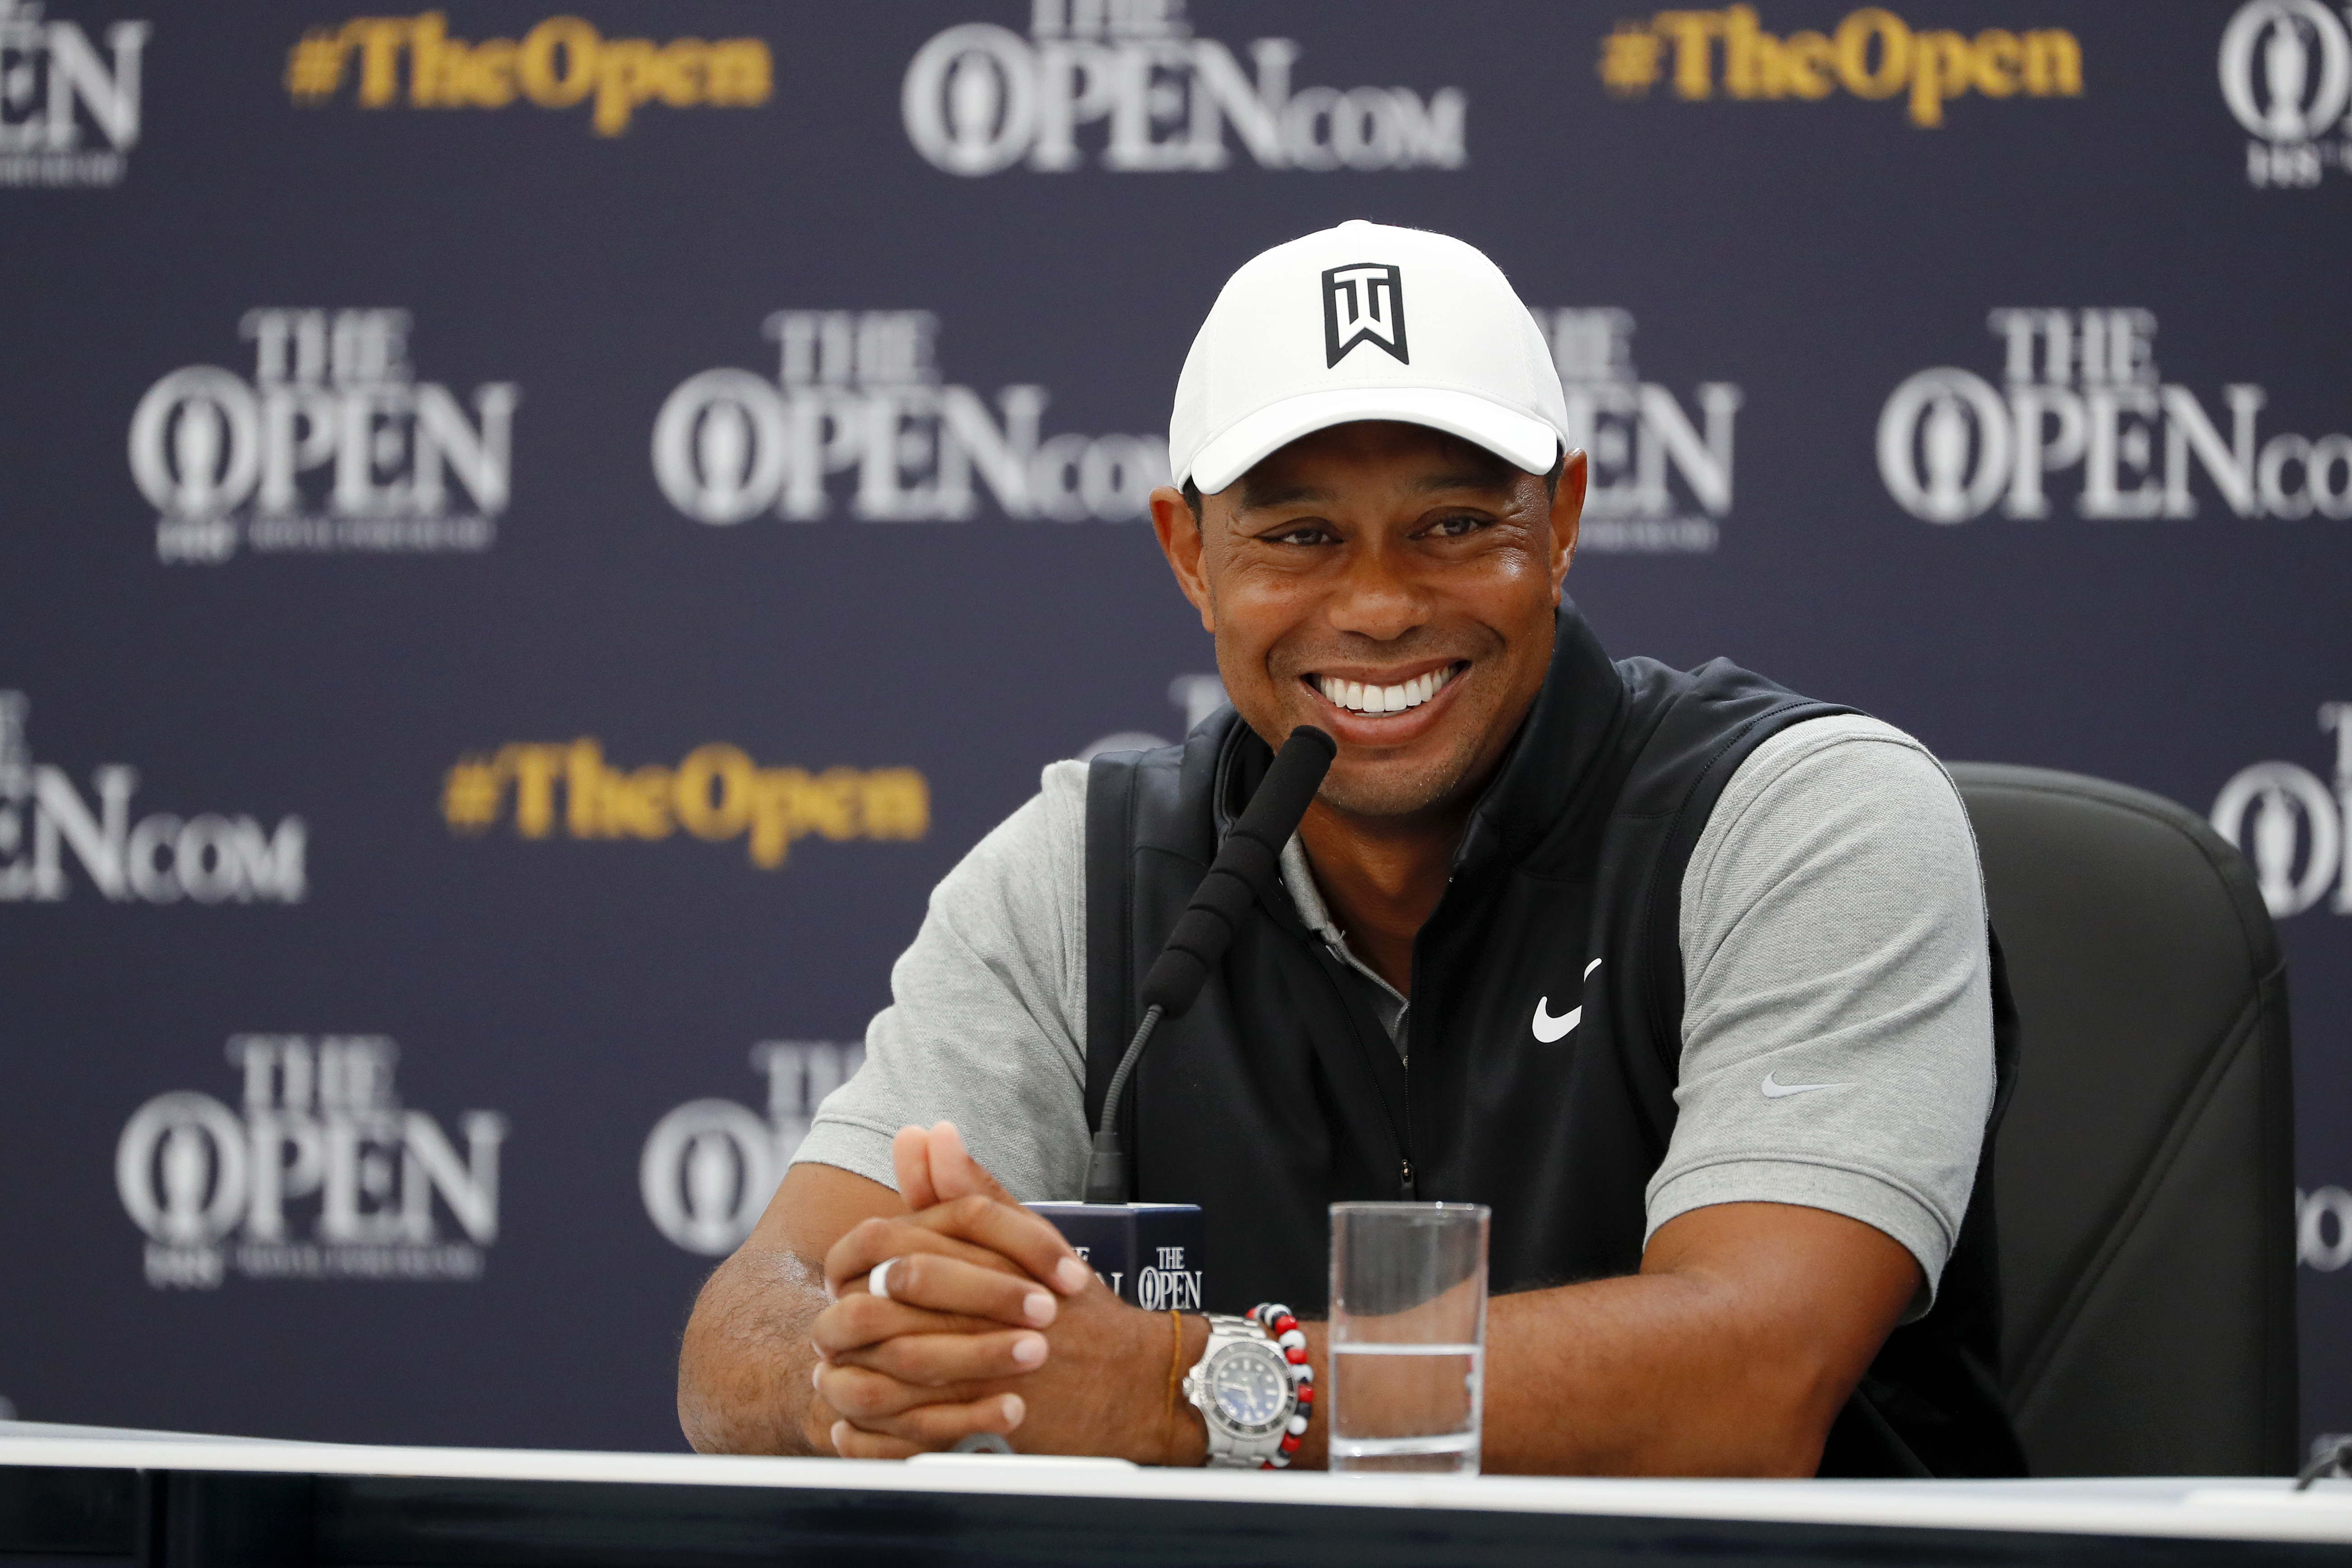 Tiger Woods is going to have to do it all on his own at Royal Portrush.